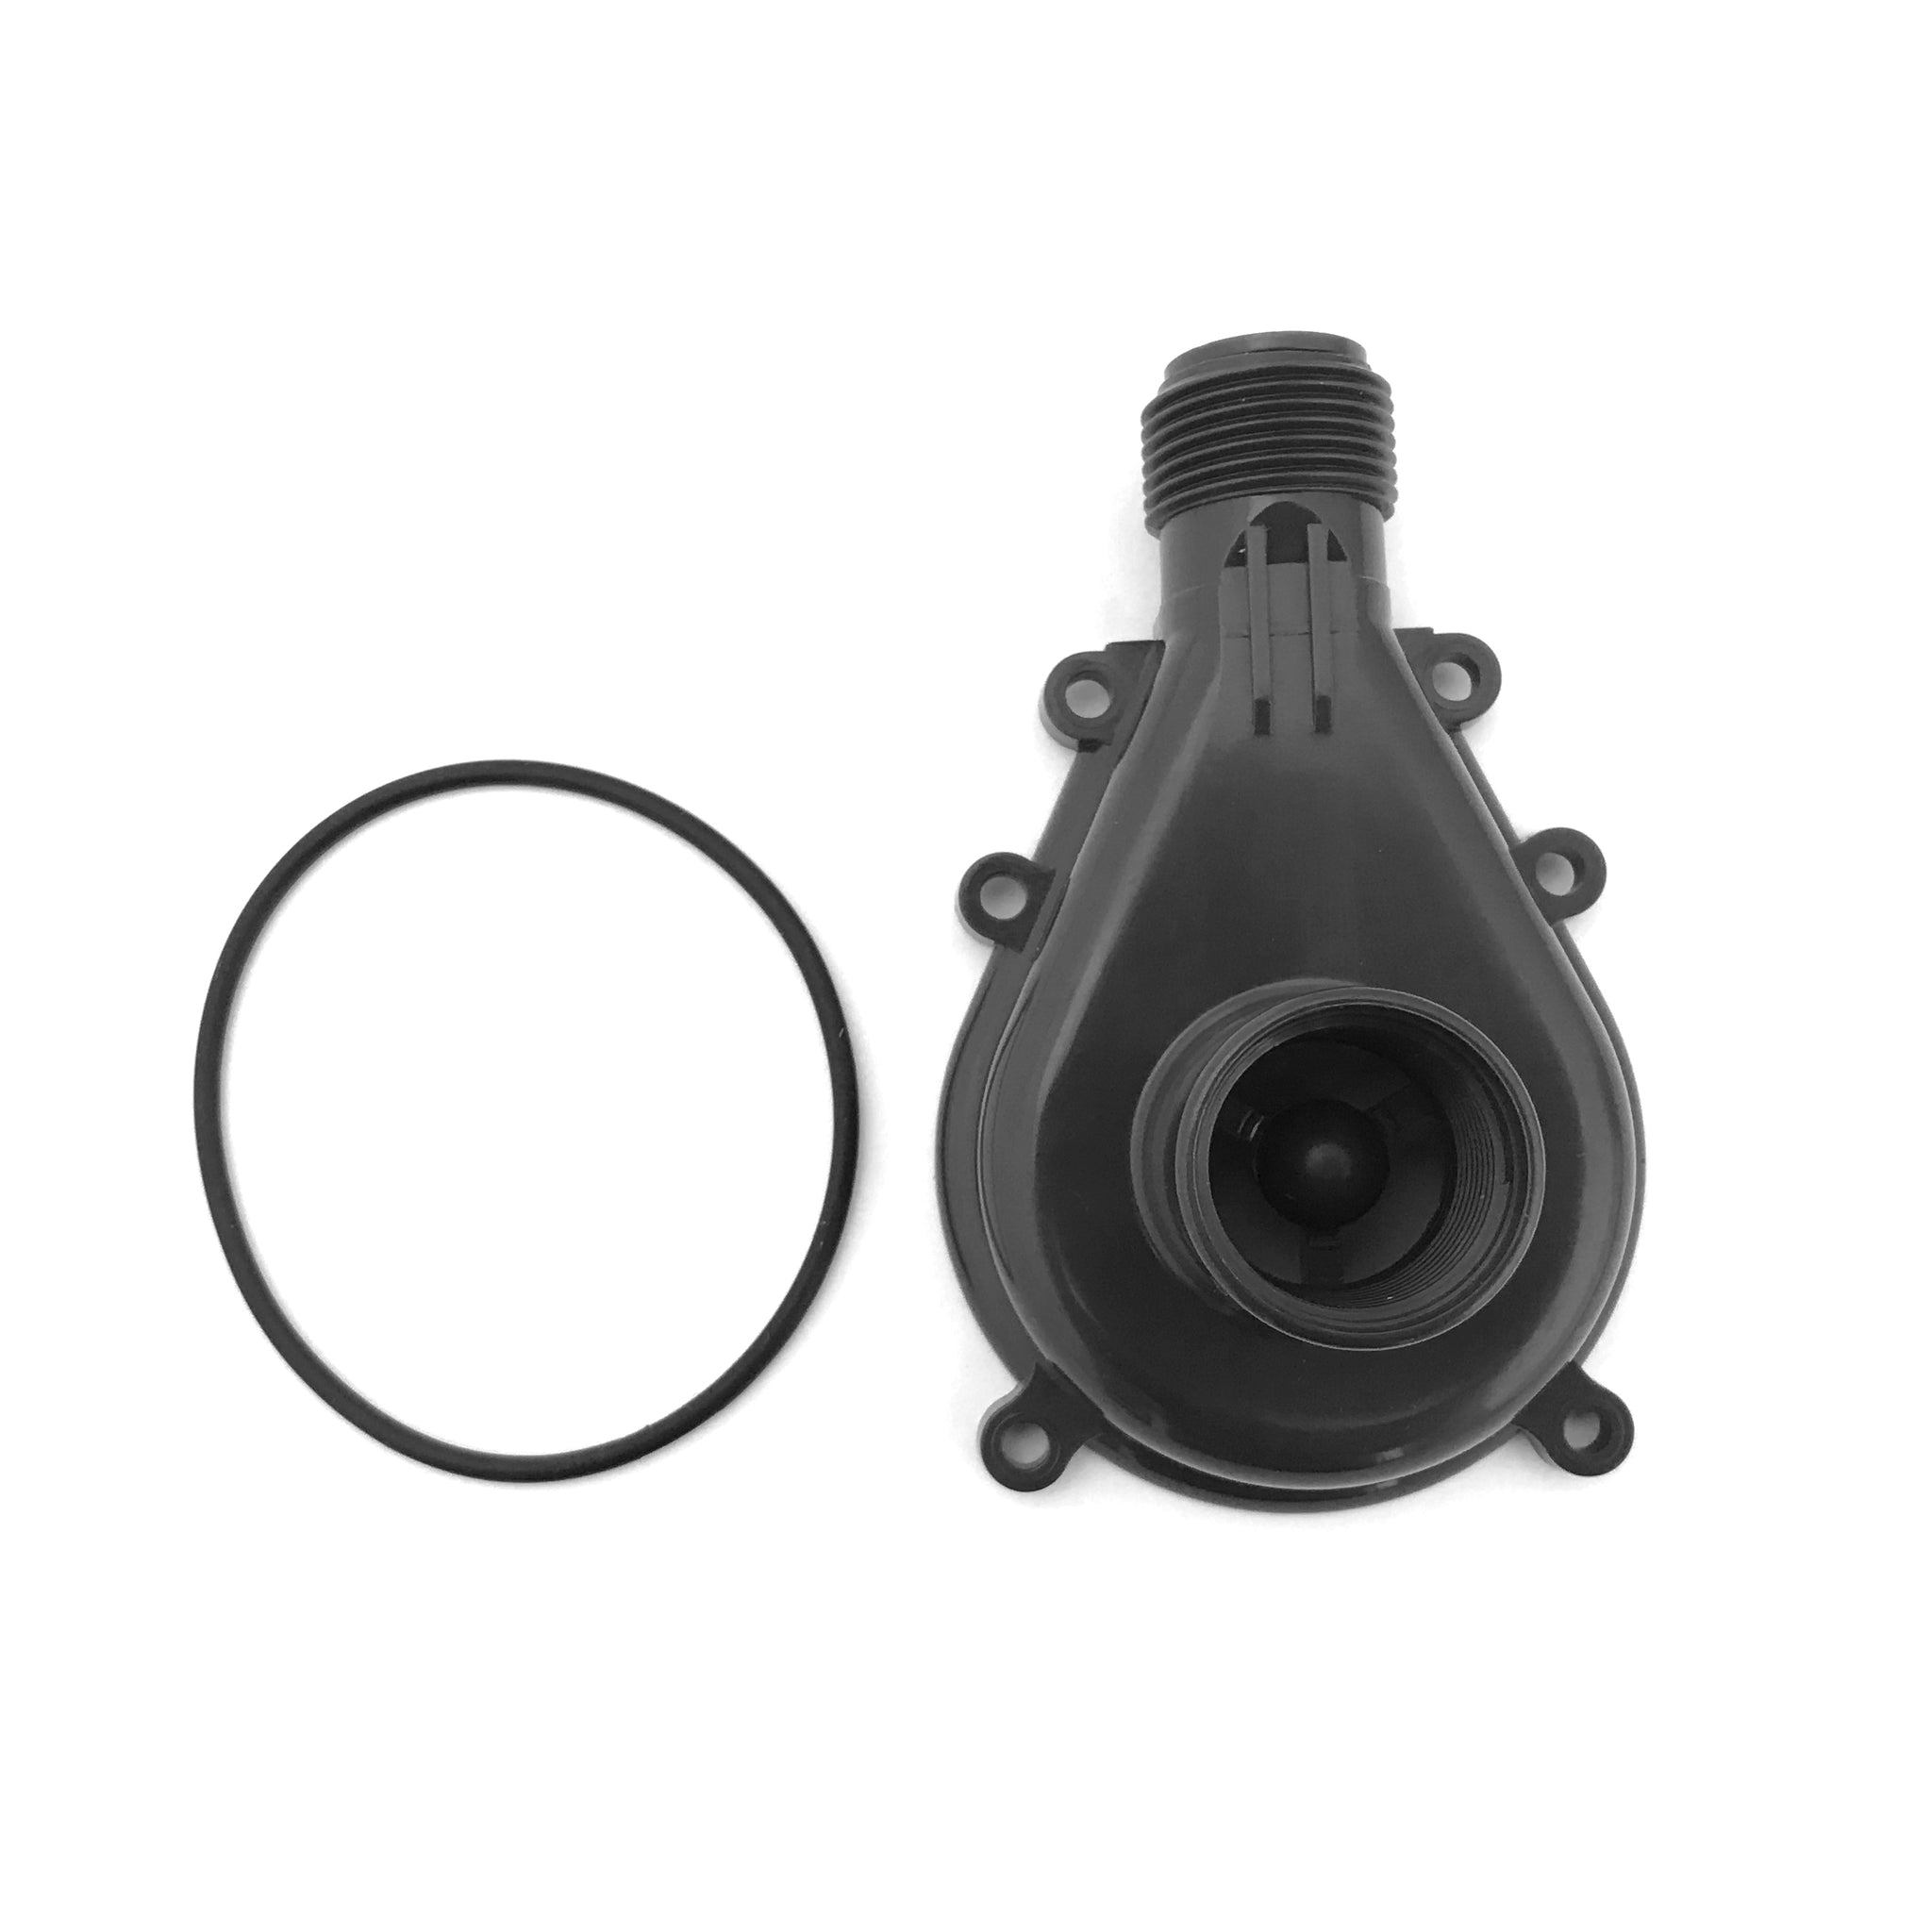 Replacement Pump Cover/Volute for Mag-Drive Pumps Model 9.5A or 9.5B